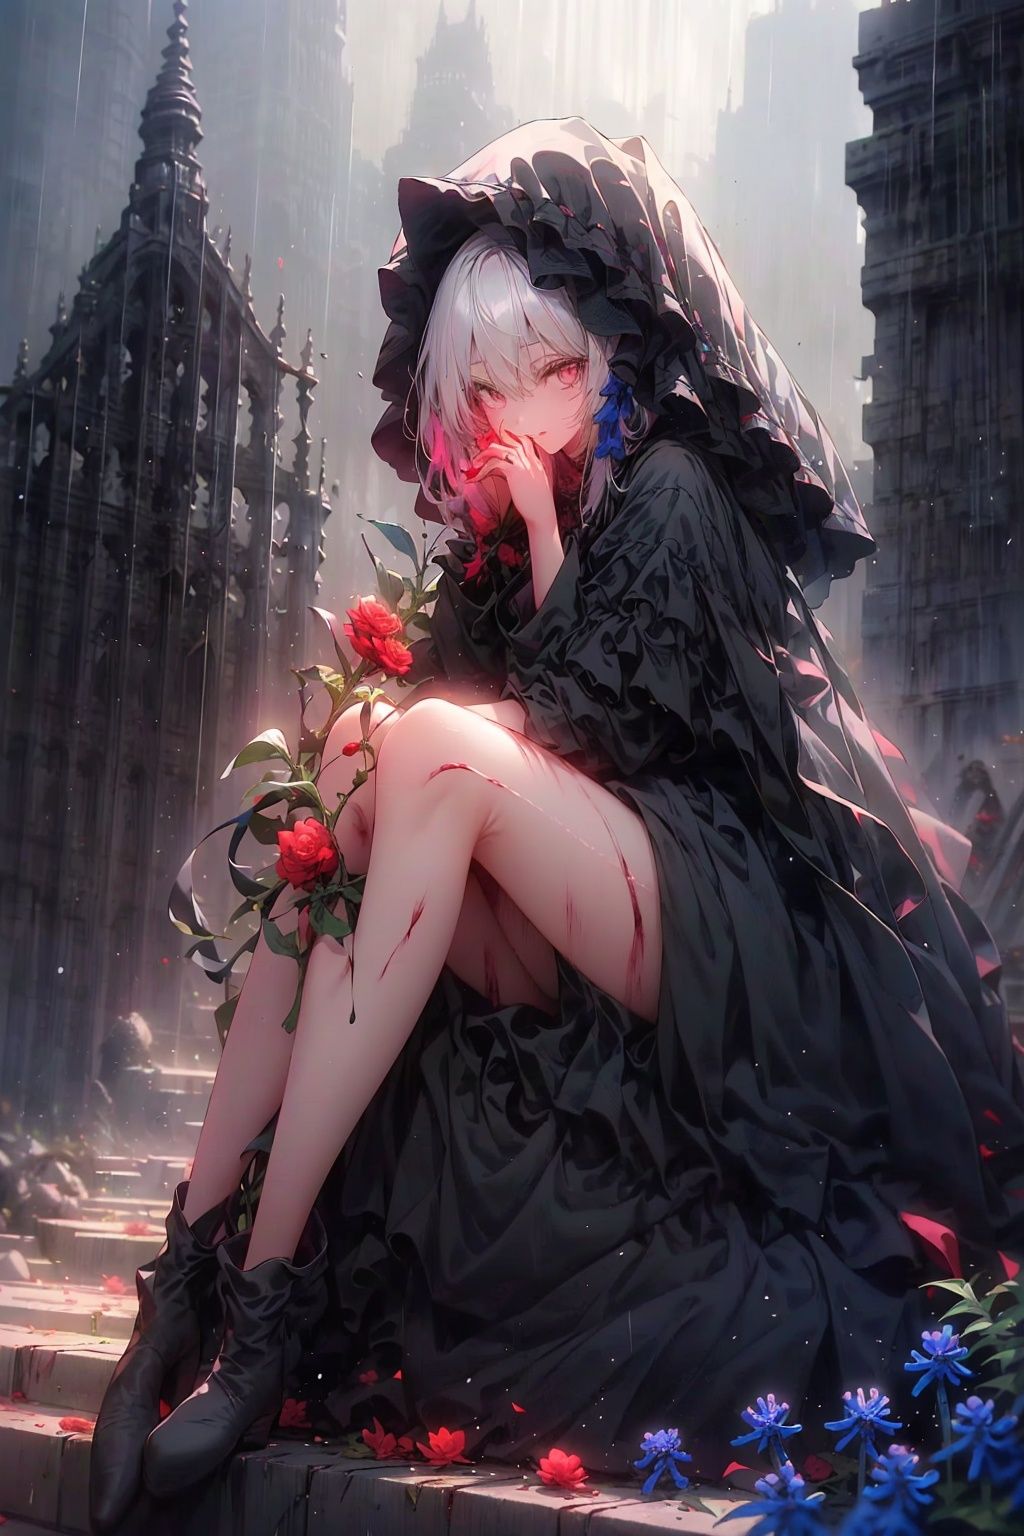  ((1girl,solo, alone, delicate face, cute, red eye pupil, pink eyelashes, red eye shadow, pink lips,excellent face,expression is enchanting,)), Character close-up,
leaning against the ruins, with a floating skeleton in the background,her posture is seductive, her hand is holding her face, and there is a flicker of evil energy runes in the background, blood mist filled, and soft light. No shoes,My feet are covered in bones. Skeletons, many skeletons. Official art, unit 8 k wallpaper, ultra detailed, beautiful and aesthetic, masterpiece, best quality, extremely detailed, dynamic angle, paper skin, radius, iuminosity, cowboyshot, the most beautiful form of Chaos, elegant, a brutalist designed, visual colors, romanticism, by James Jean, roby dwi antono, cross tran, francis bacon, Michael mraz, Adrian ghenie, Petra cortright, Gerhard richter, Takato yamamoto, ashley wood, atmospheric, ((late at night,dark)), light rain,dark, limited palette, contrast,(((Cornflower))), cornflower, cornflower,vines, forest, lens flare, hdr, Tyndall effect,damp,wet,cold theme, broken wall, aqua theme, floating hair, high detail, nayutaren, Nyarly